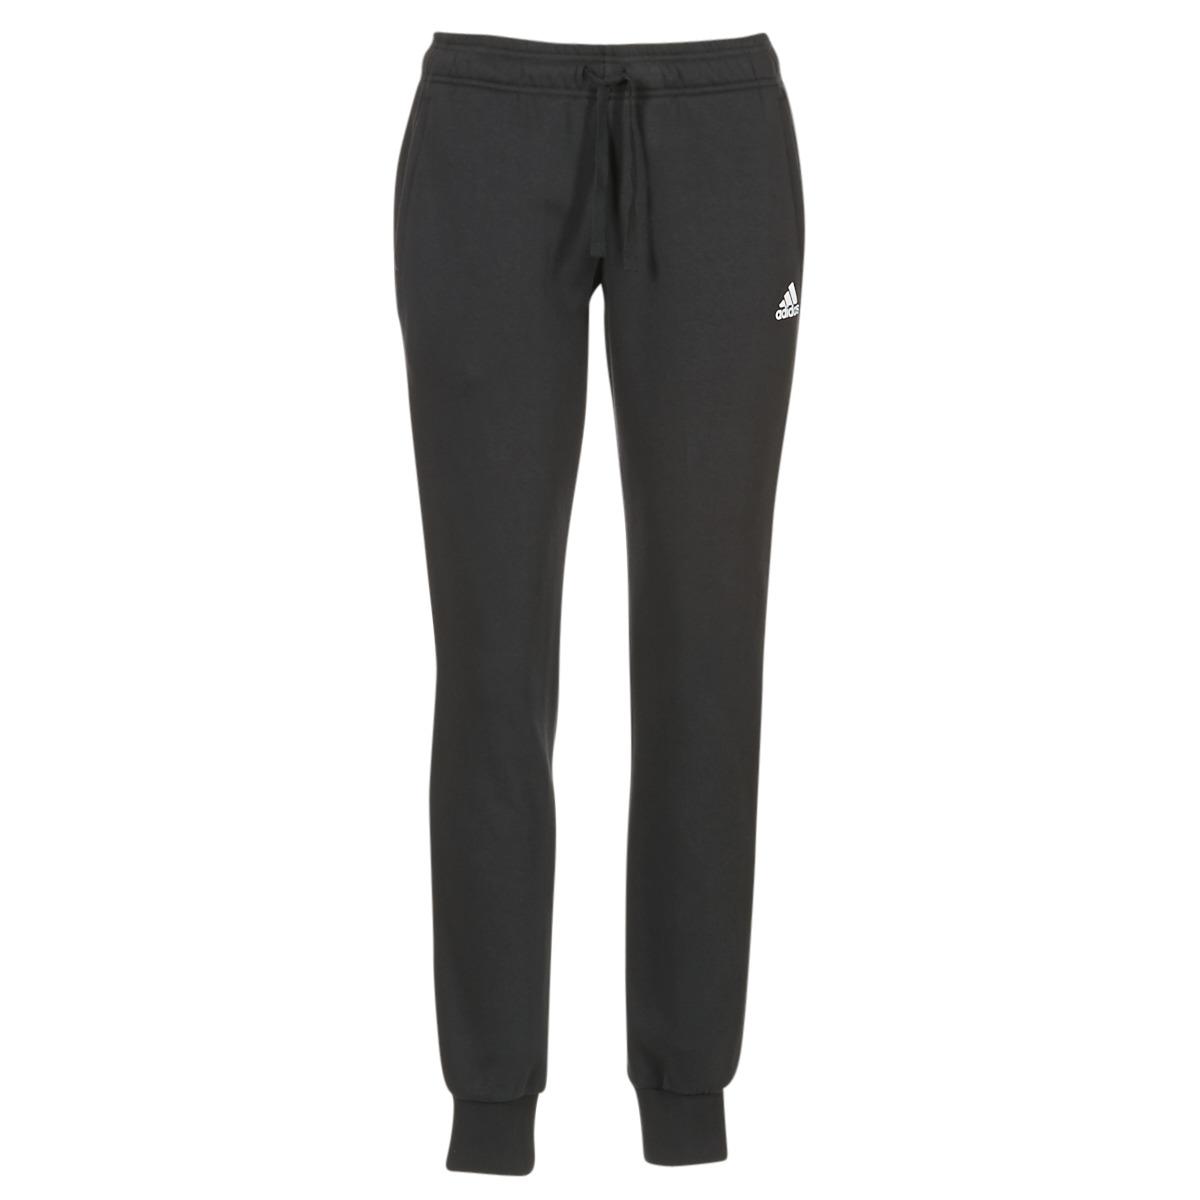 adidas Ess Solid Pant Women's 